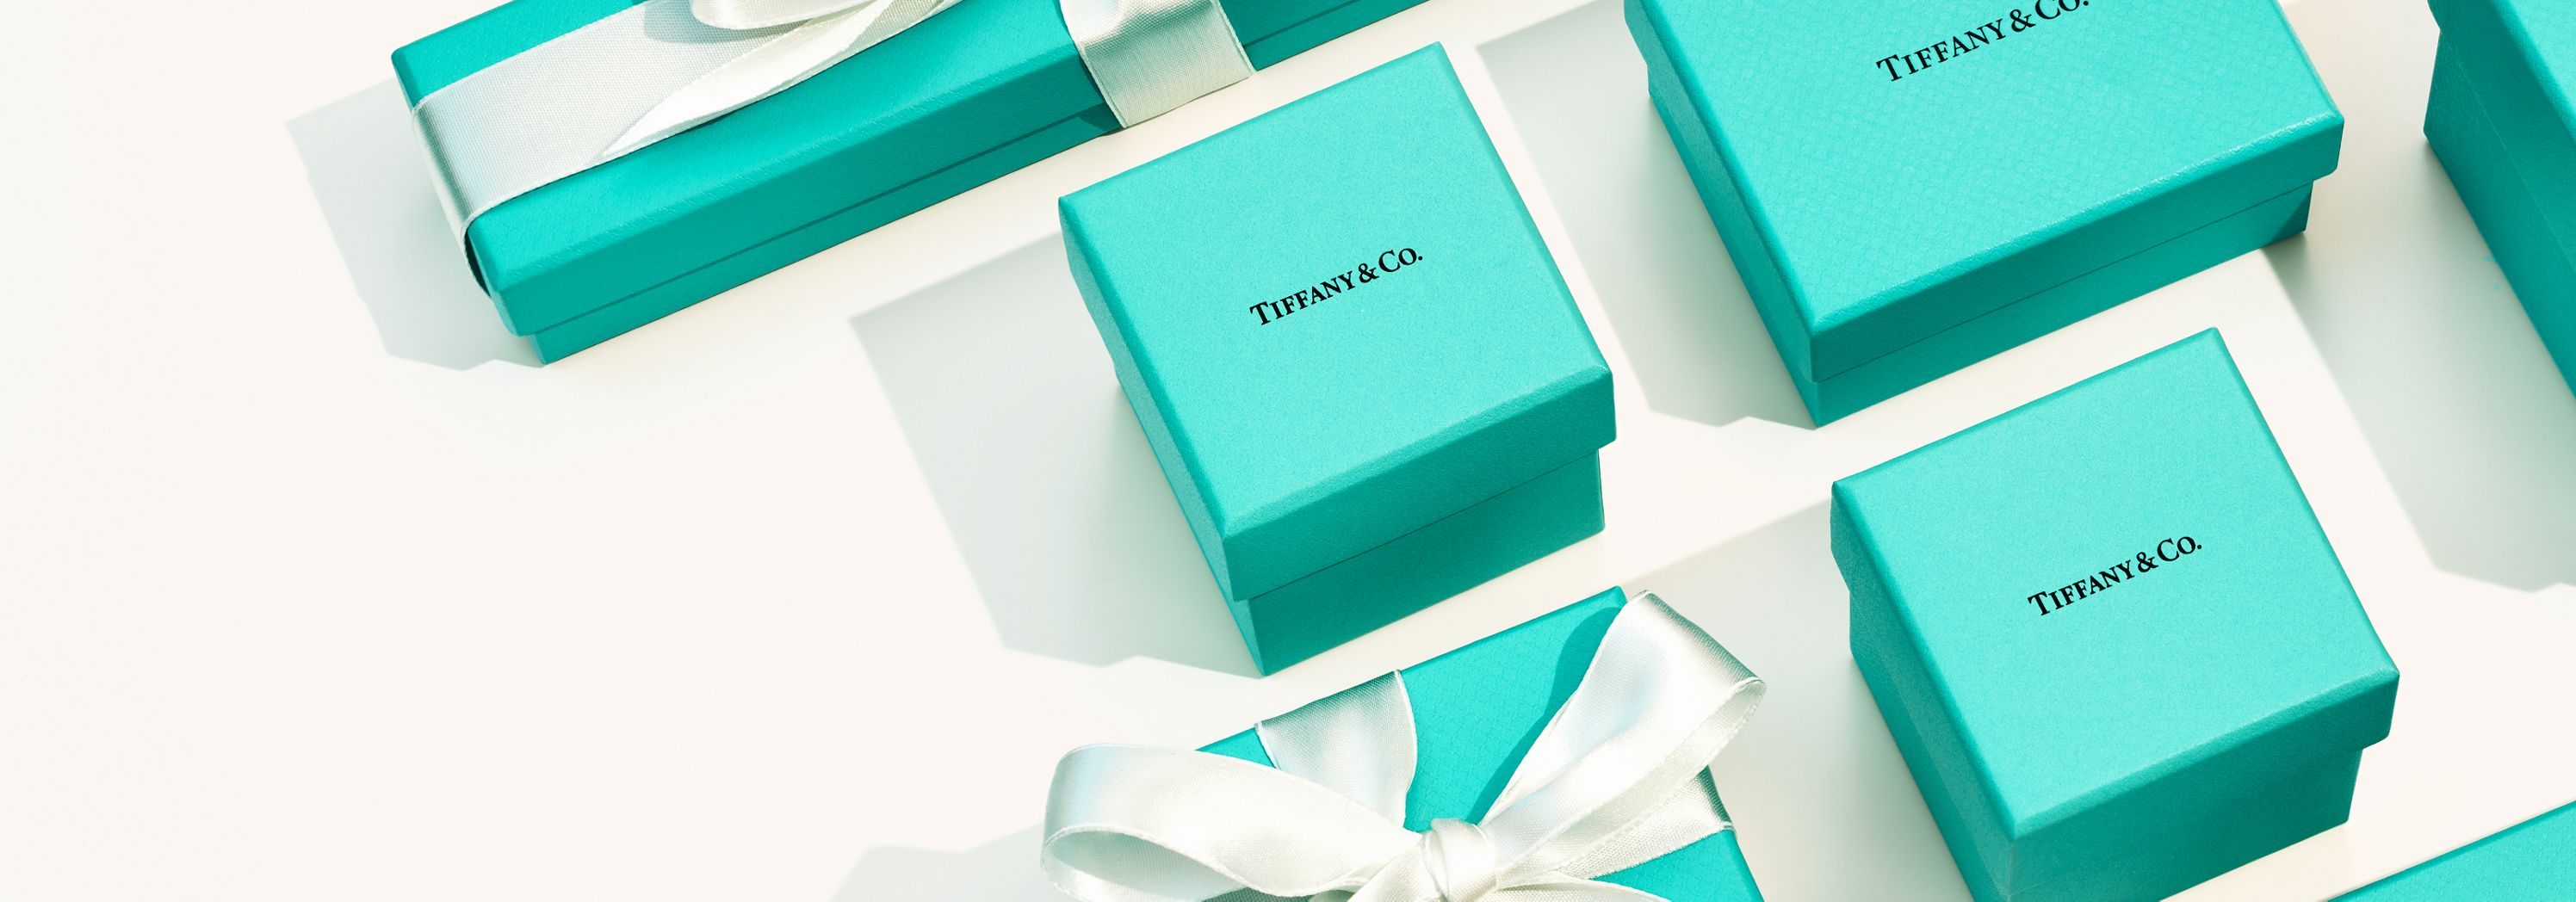 Unique Luxury Gifts Tiffany Co